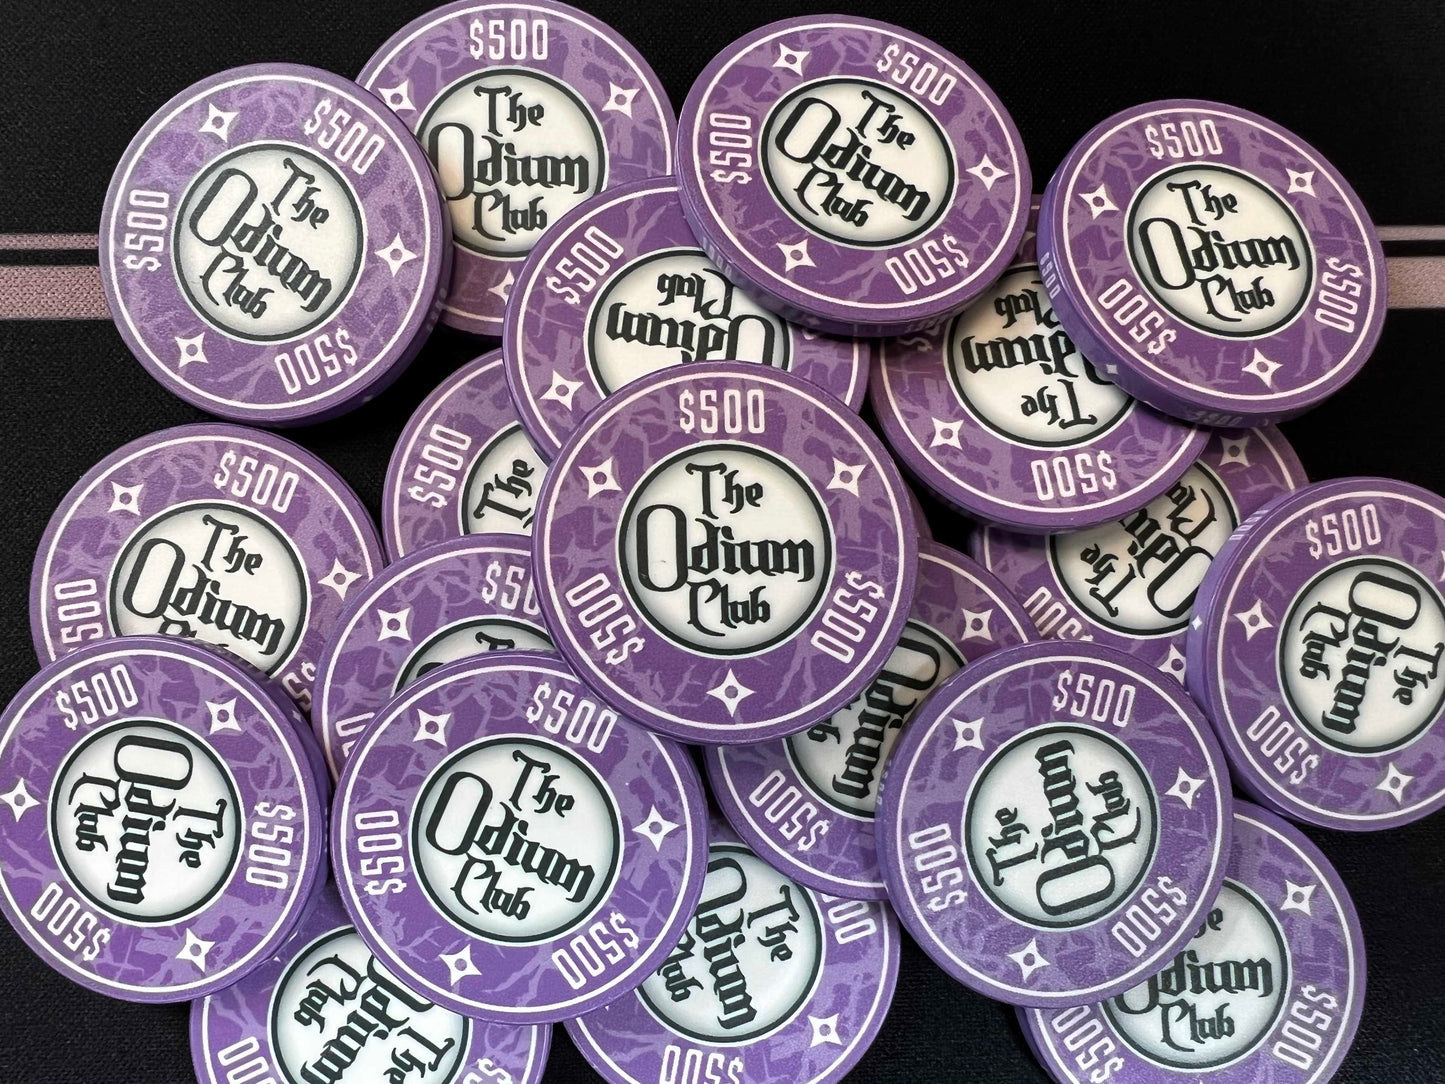 Shown here are the Odium Club 500 dollar purple poker chips shown in a big chip pot. These are 39mm chips (actually closer to 40mm) or "casino size poker chips." They are the regular poker chip thickness of 3.3mm or 0.13 inches. Whether you're a super high roller who needs $500 chips to host high-stakes poker games...or whether you're a novice poker player, these are the nicest chips for texas holdem money can buy.